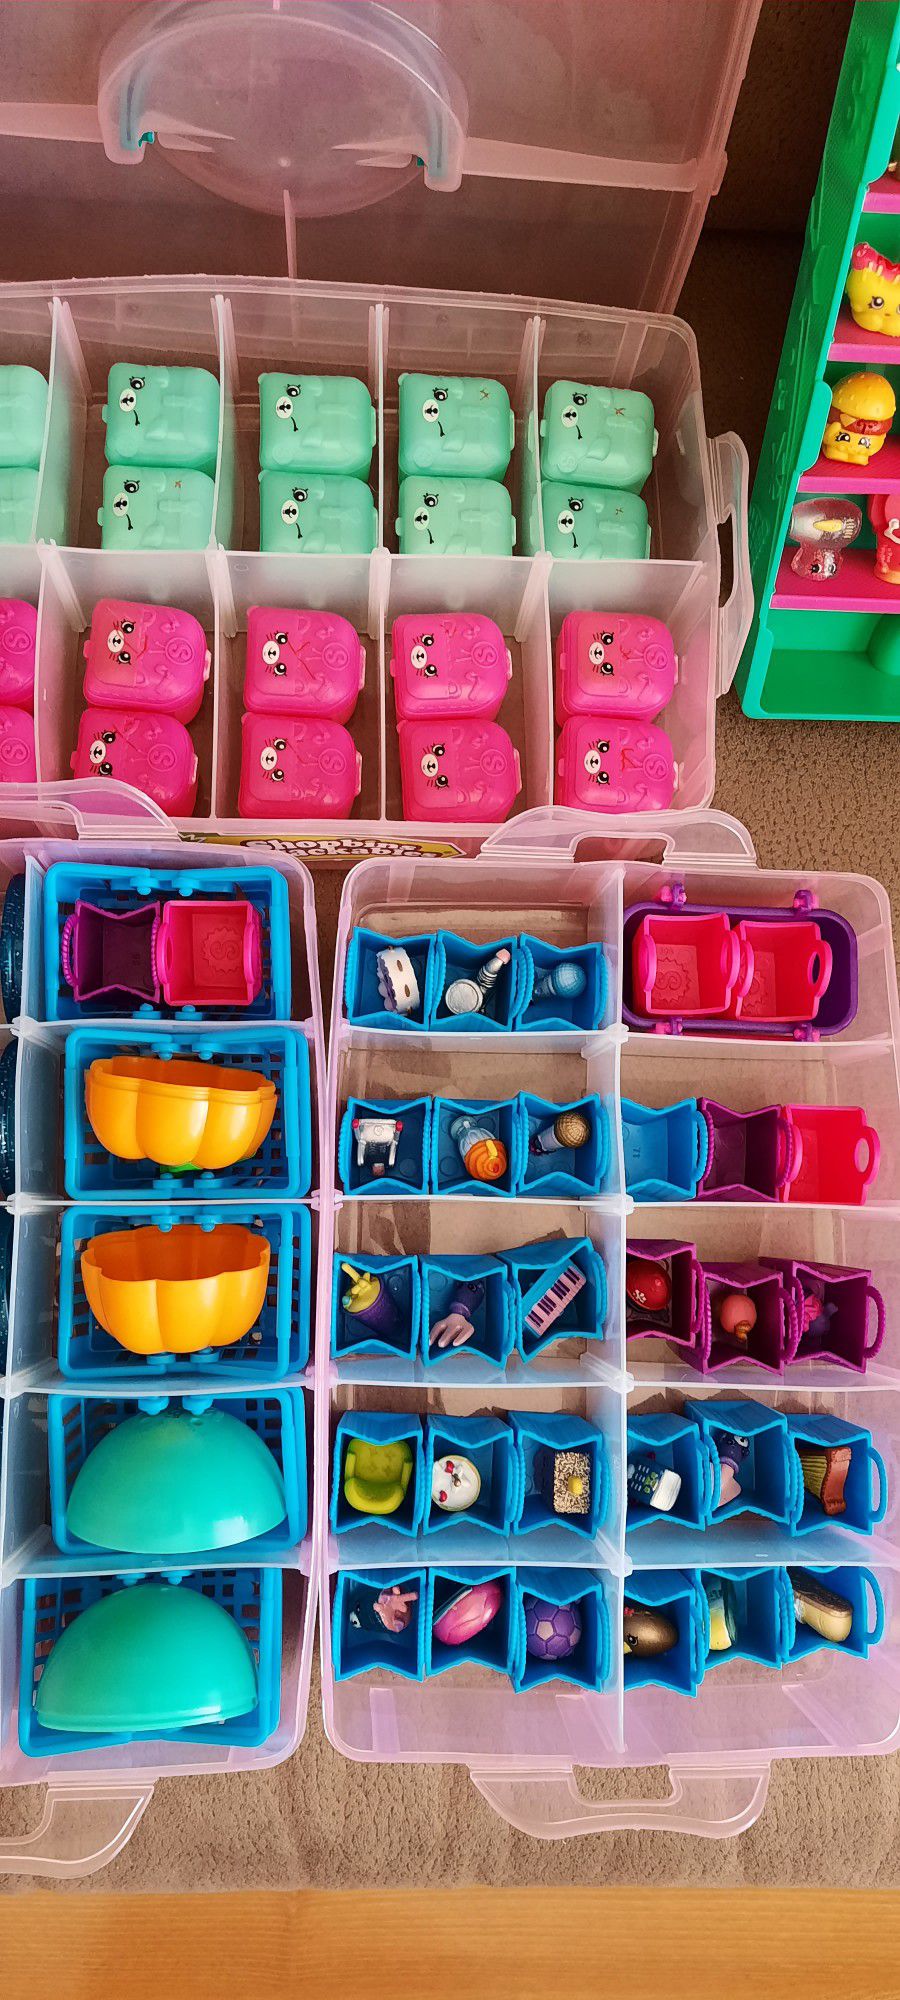 Shopkins Collectors Case for Sale in Foster City, CA - OfferUp